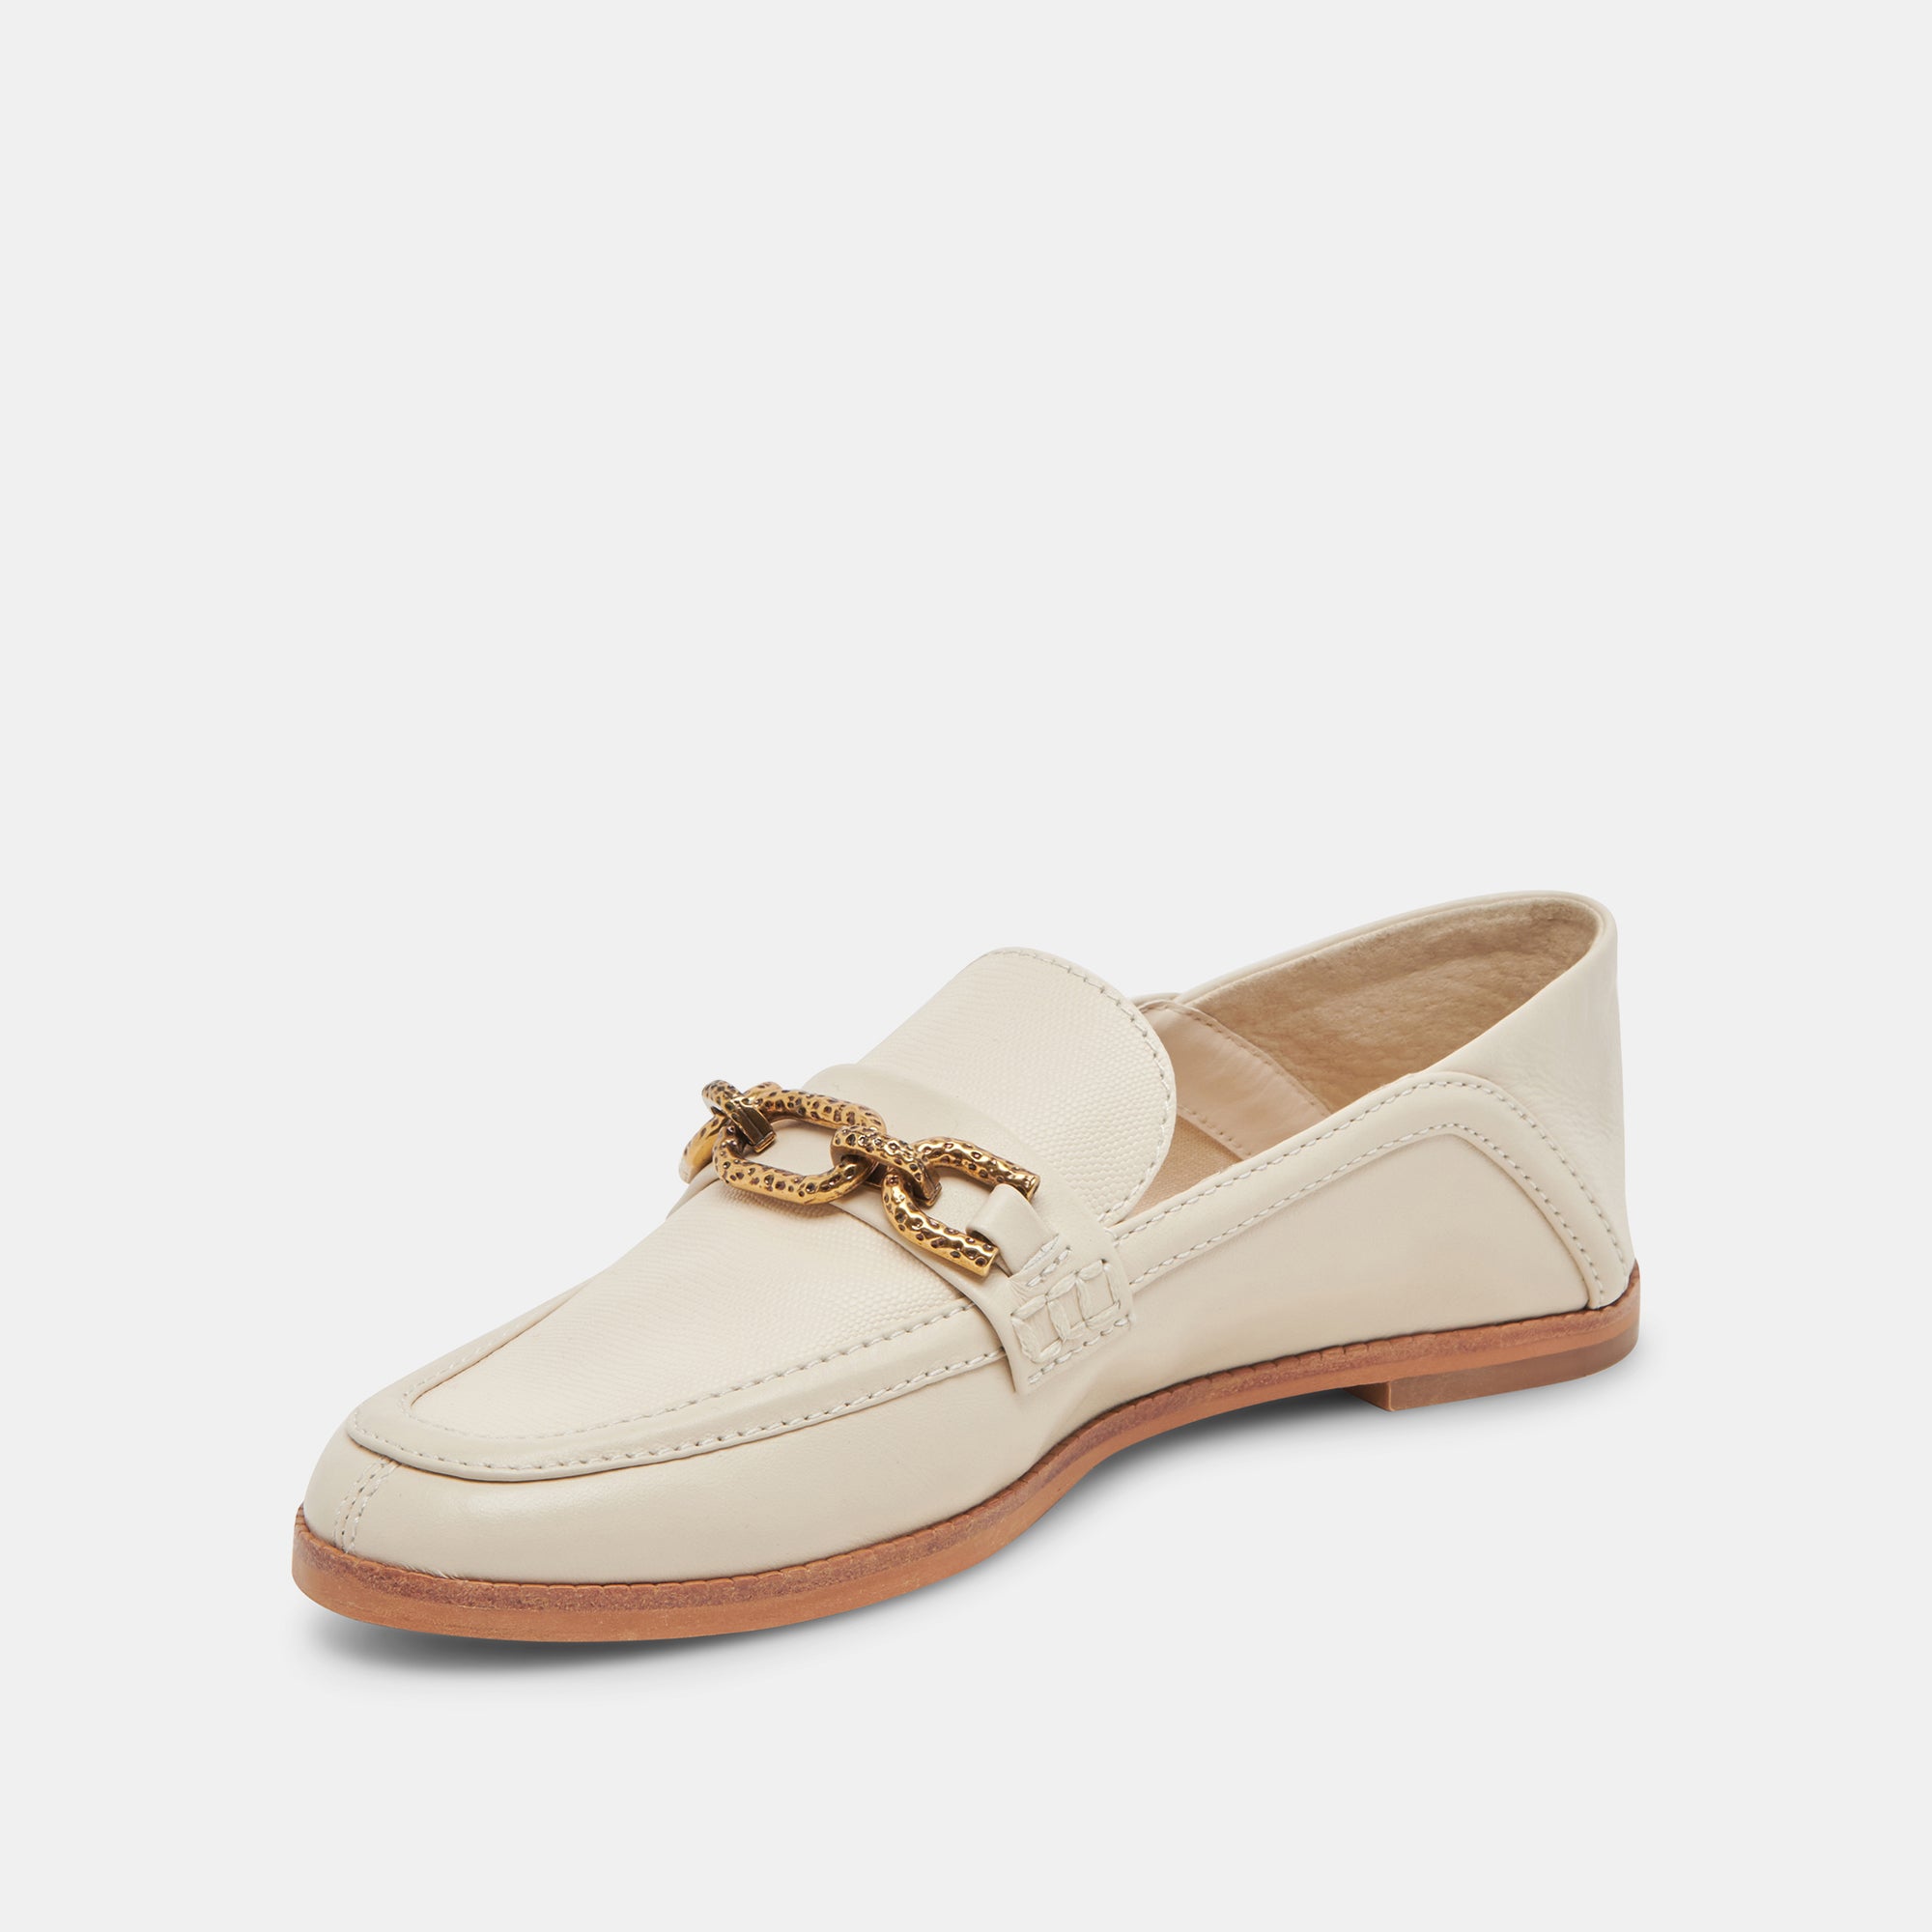 REIGN FLATS IVORY LEATHER – Dolce Vita